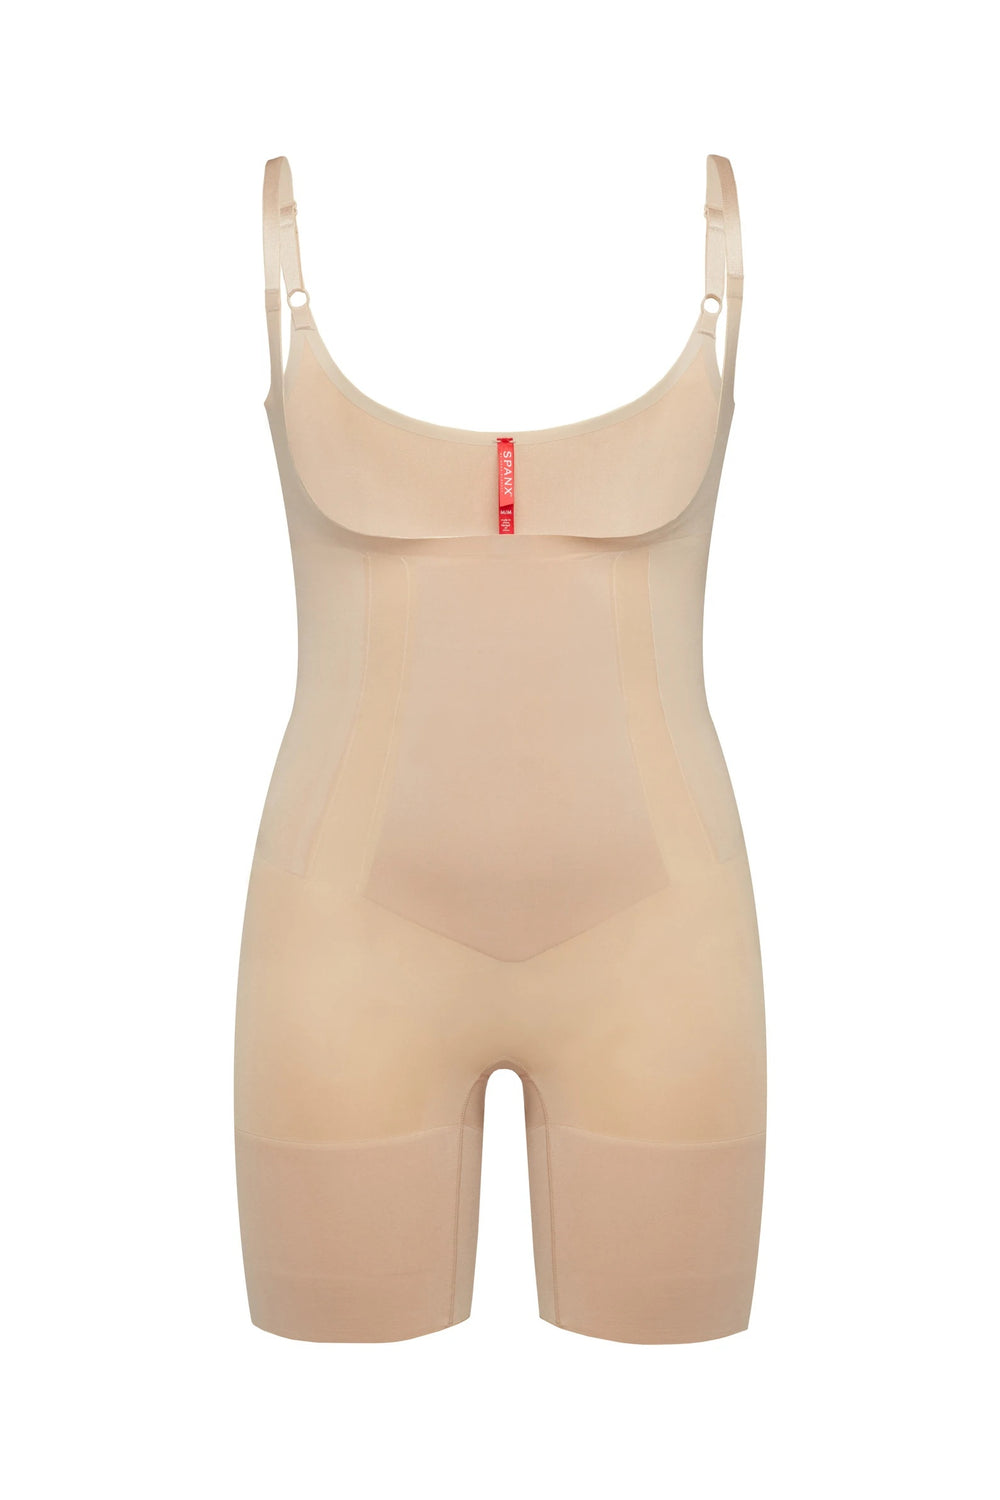 HAUTE CONTOUR-OPEN-BUST MIDTHIGH BODYSUIT by Spanx Online, THE ICONIC